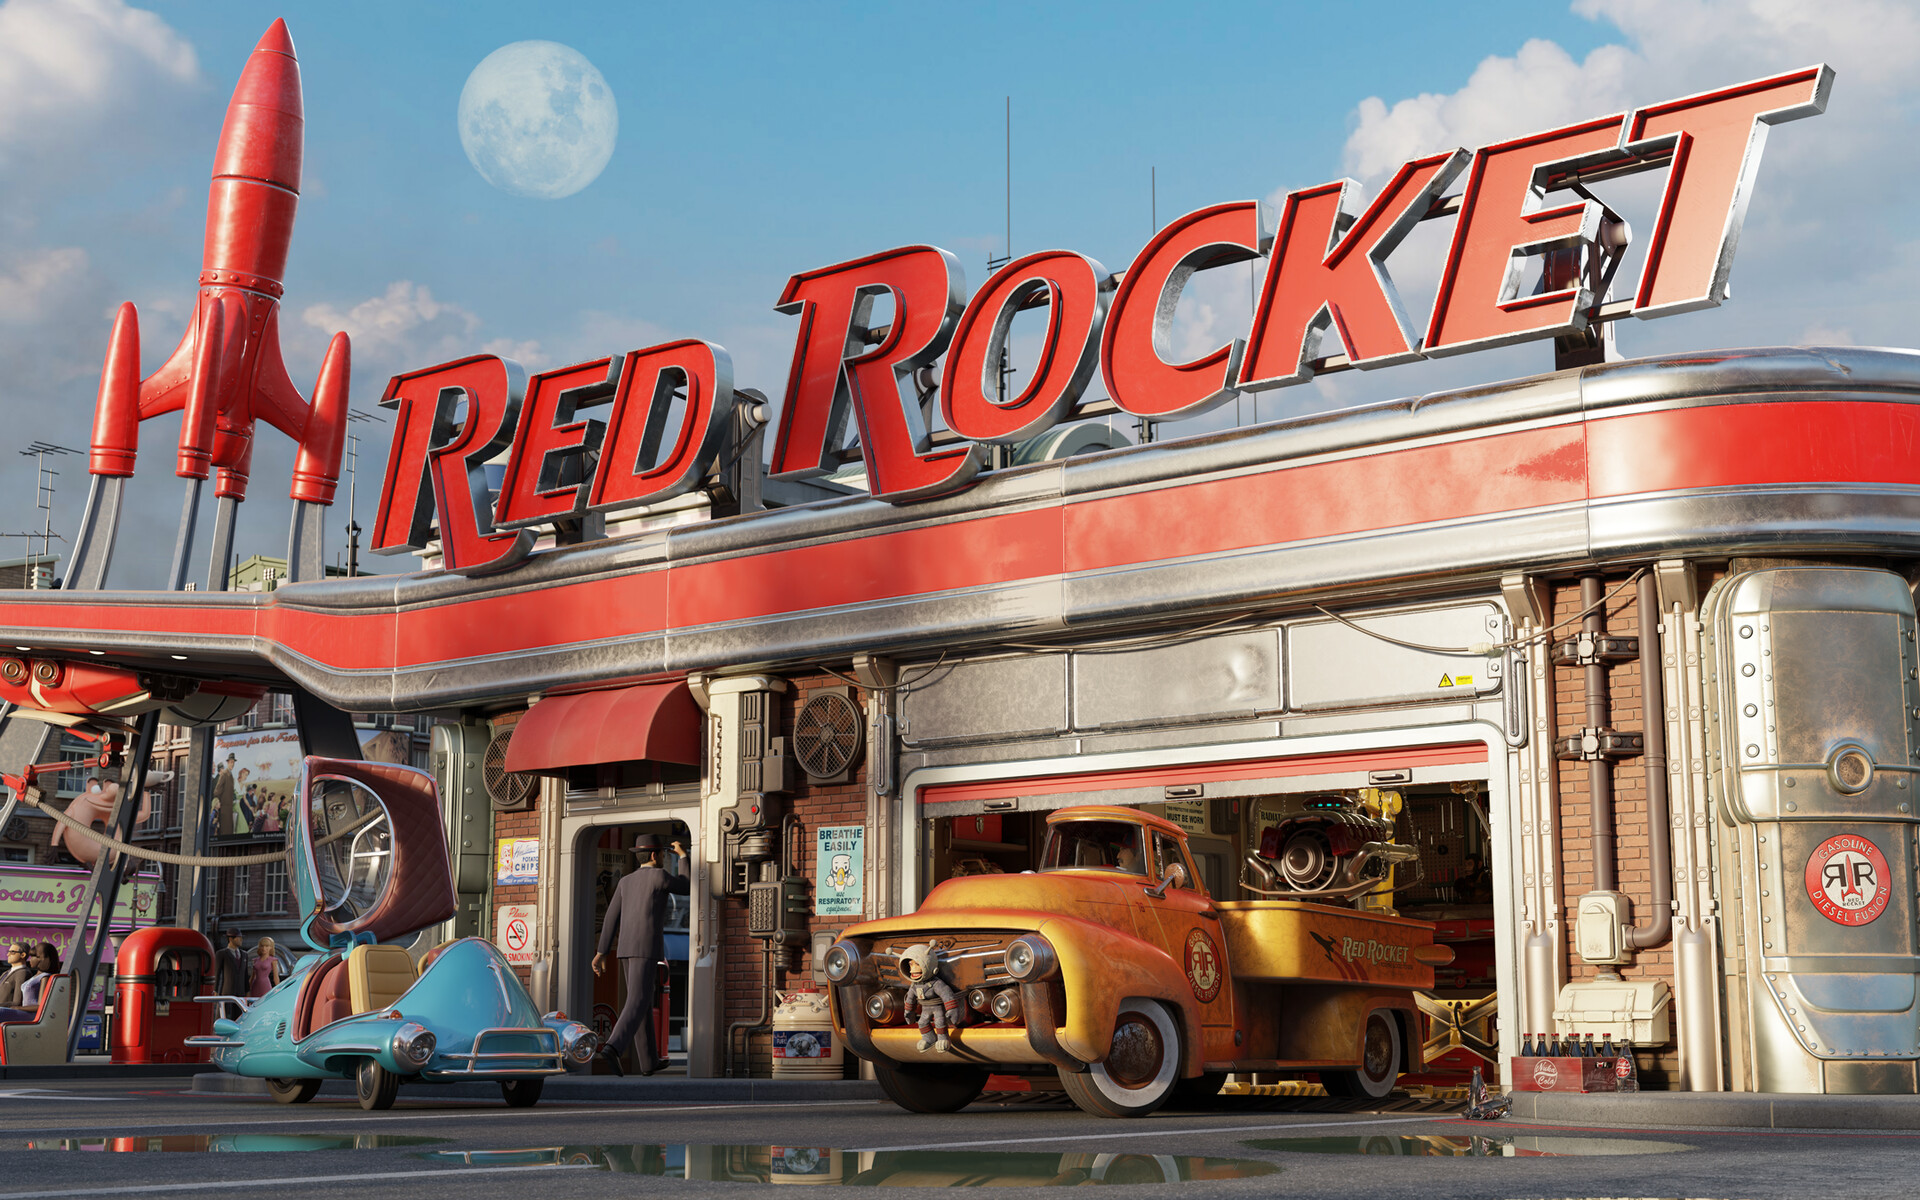 Fallout Red Rocket.